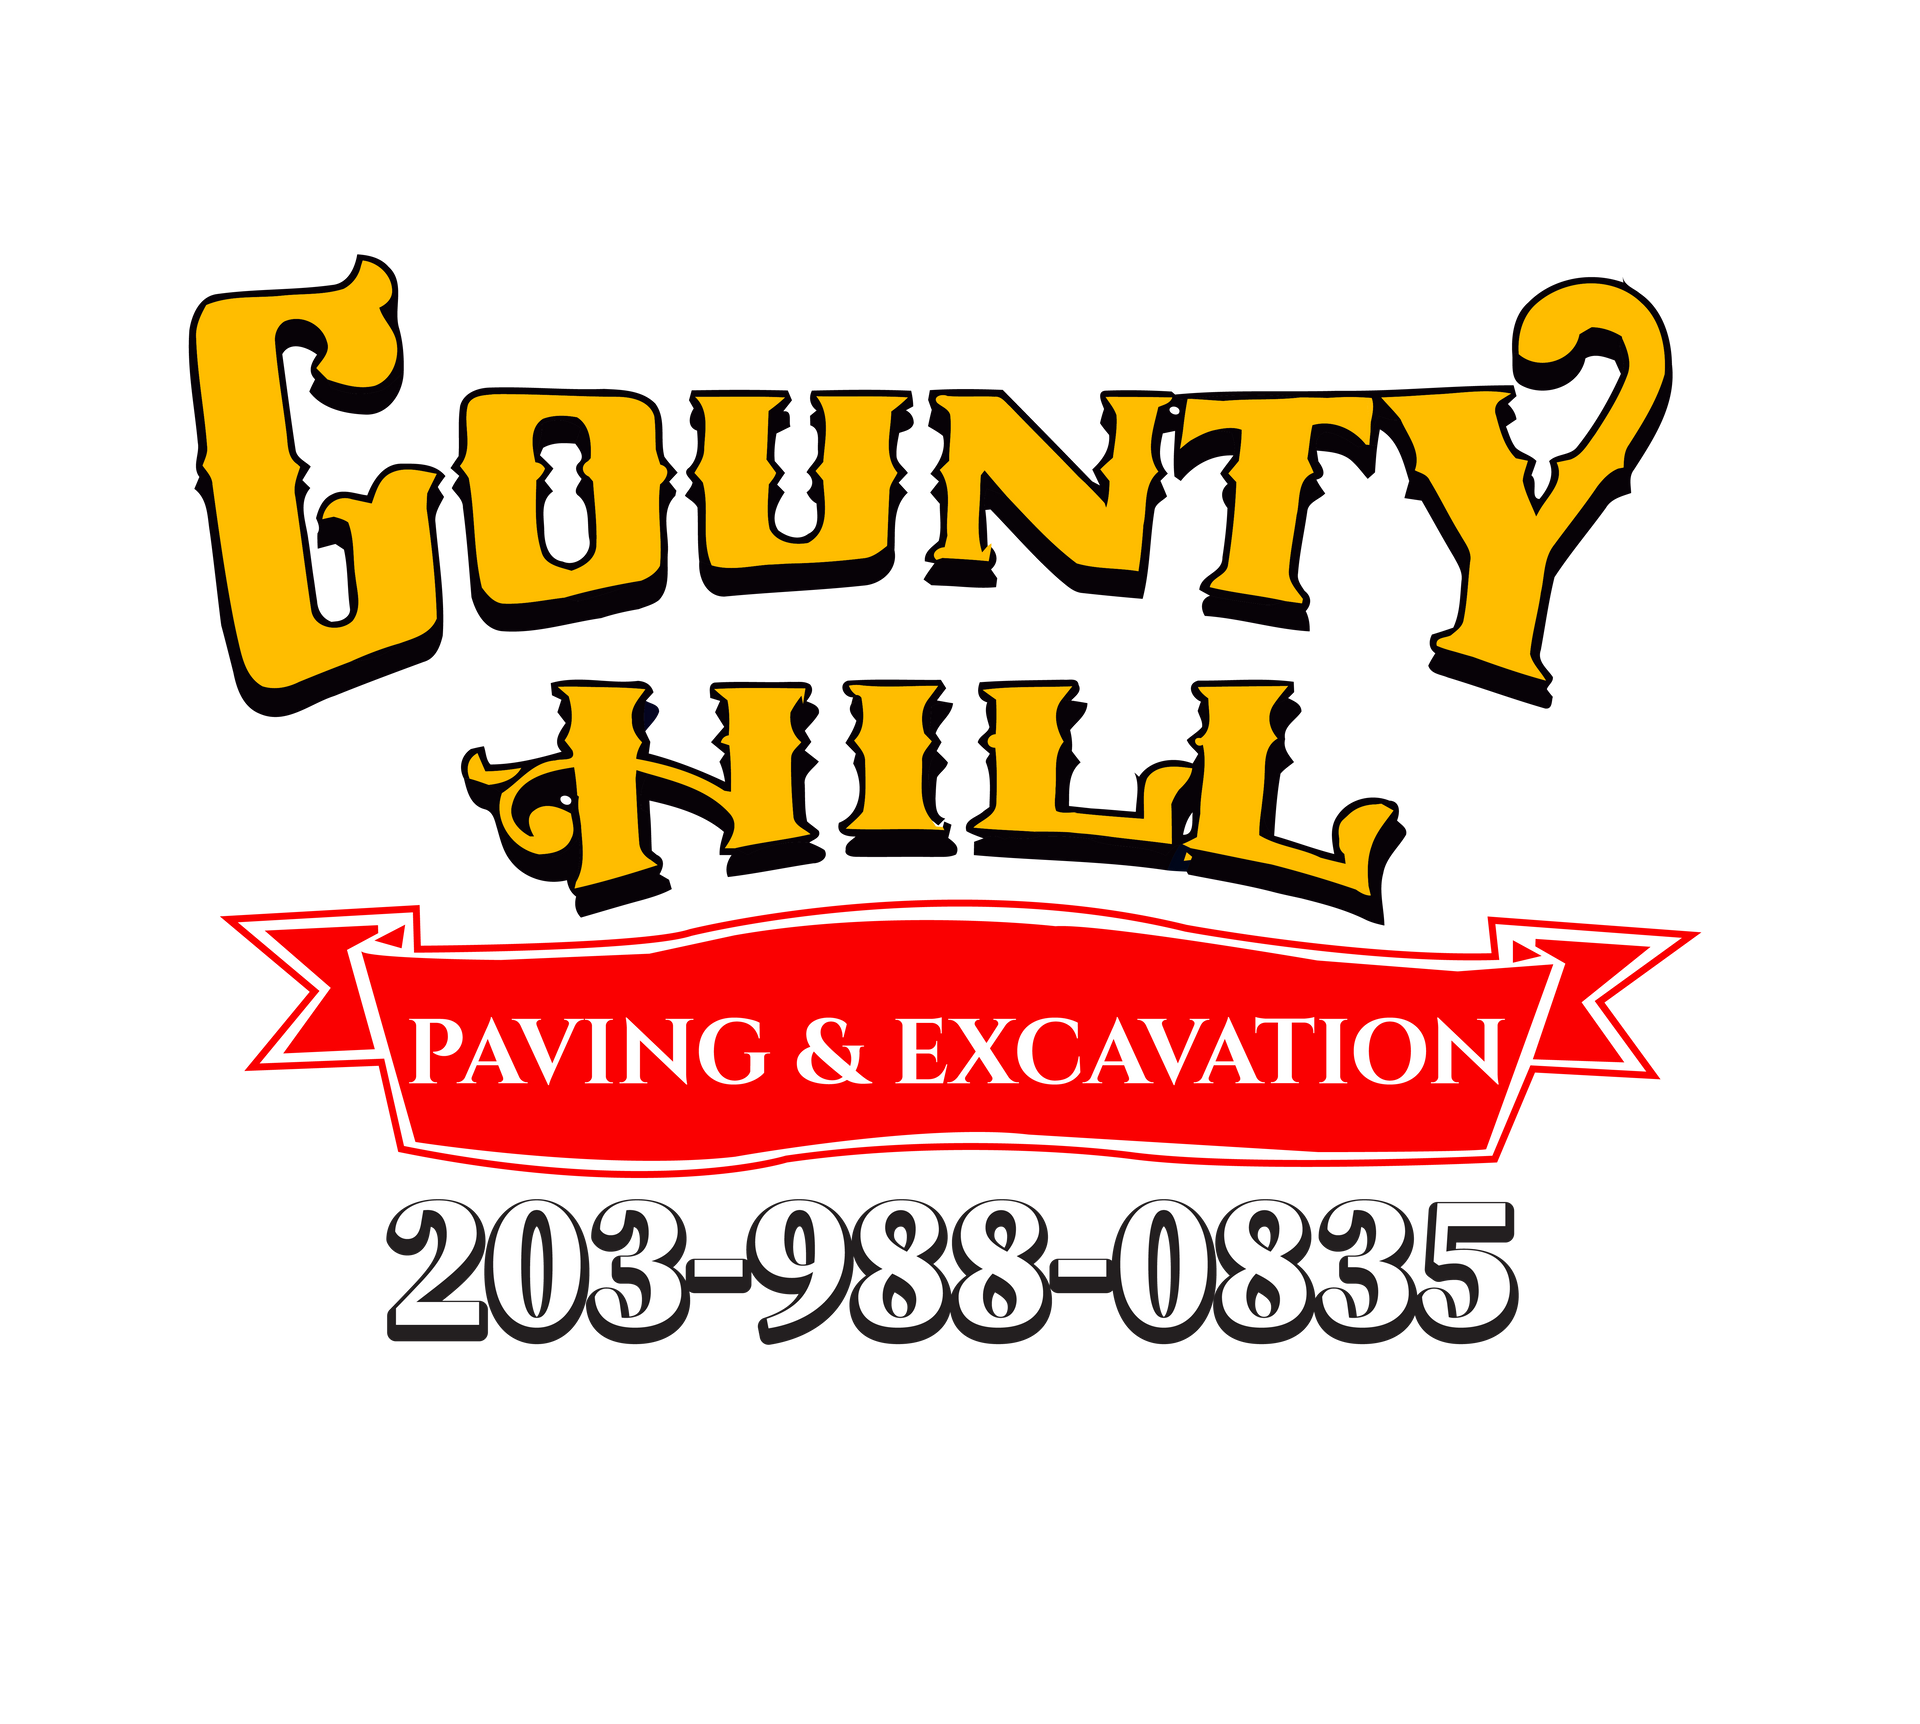 County Hill Paving & Excavation logo